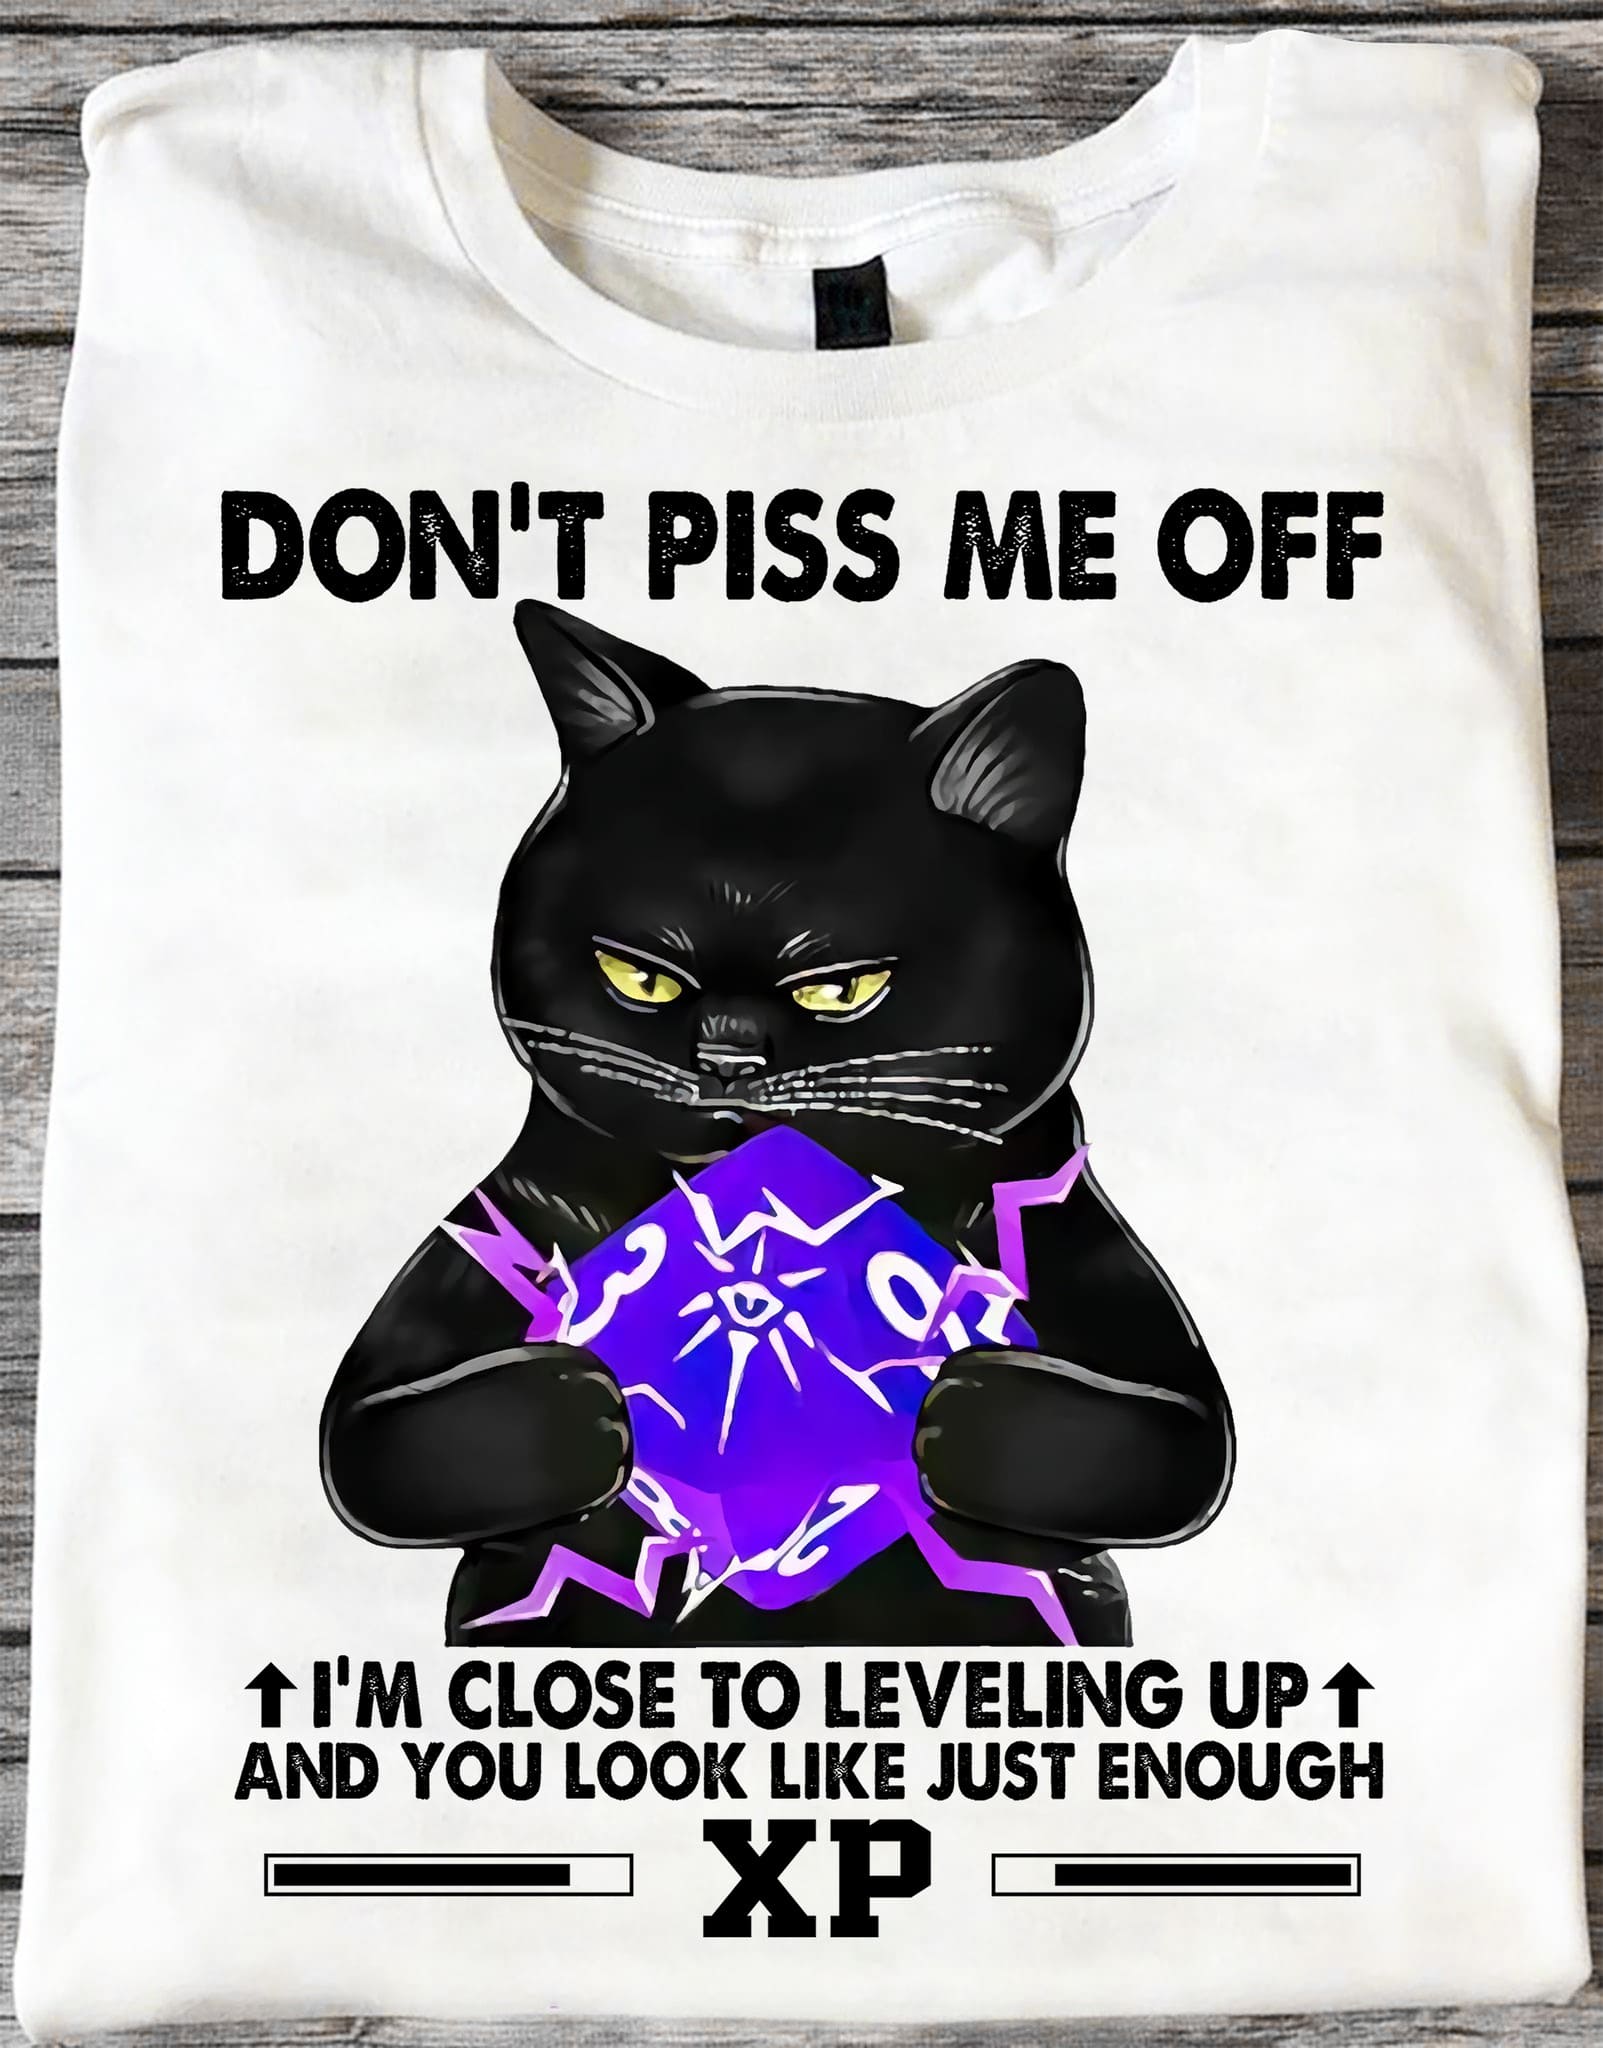 Don't piss me off I'm close to leveling up and you look like just enough - Cat rolling dices, Dungeons and Dragons